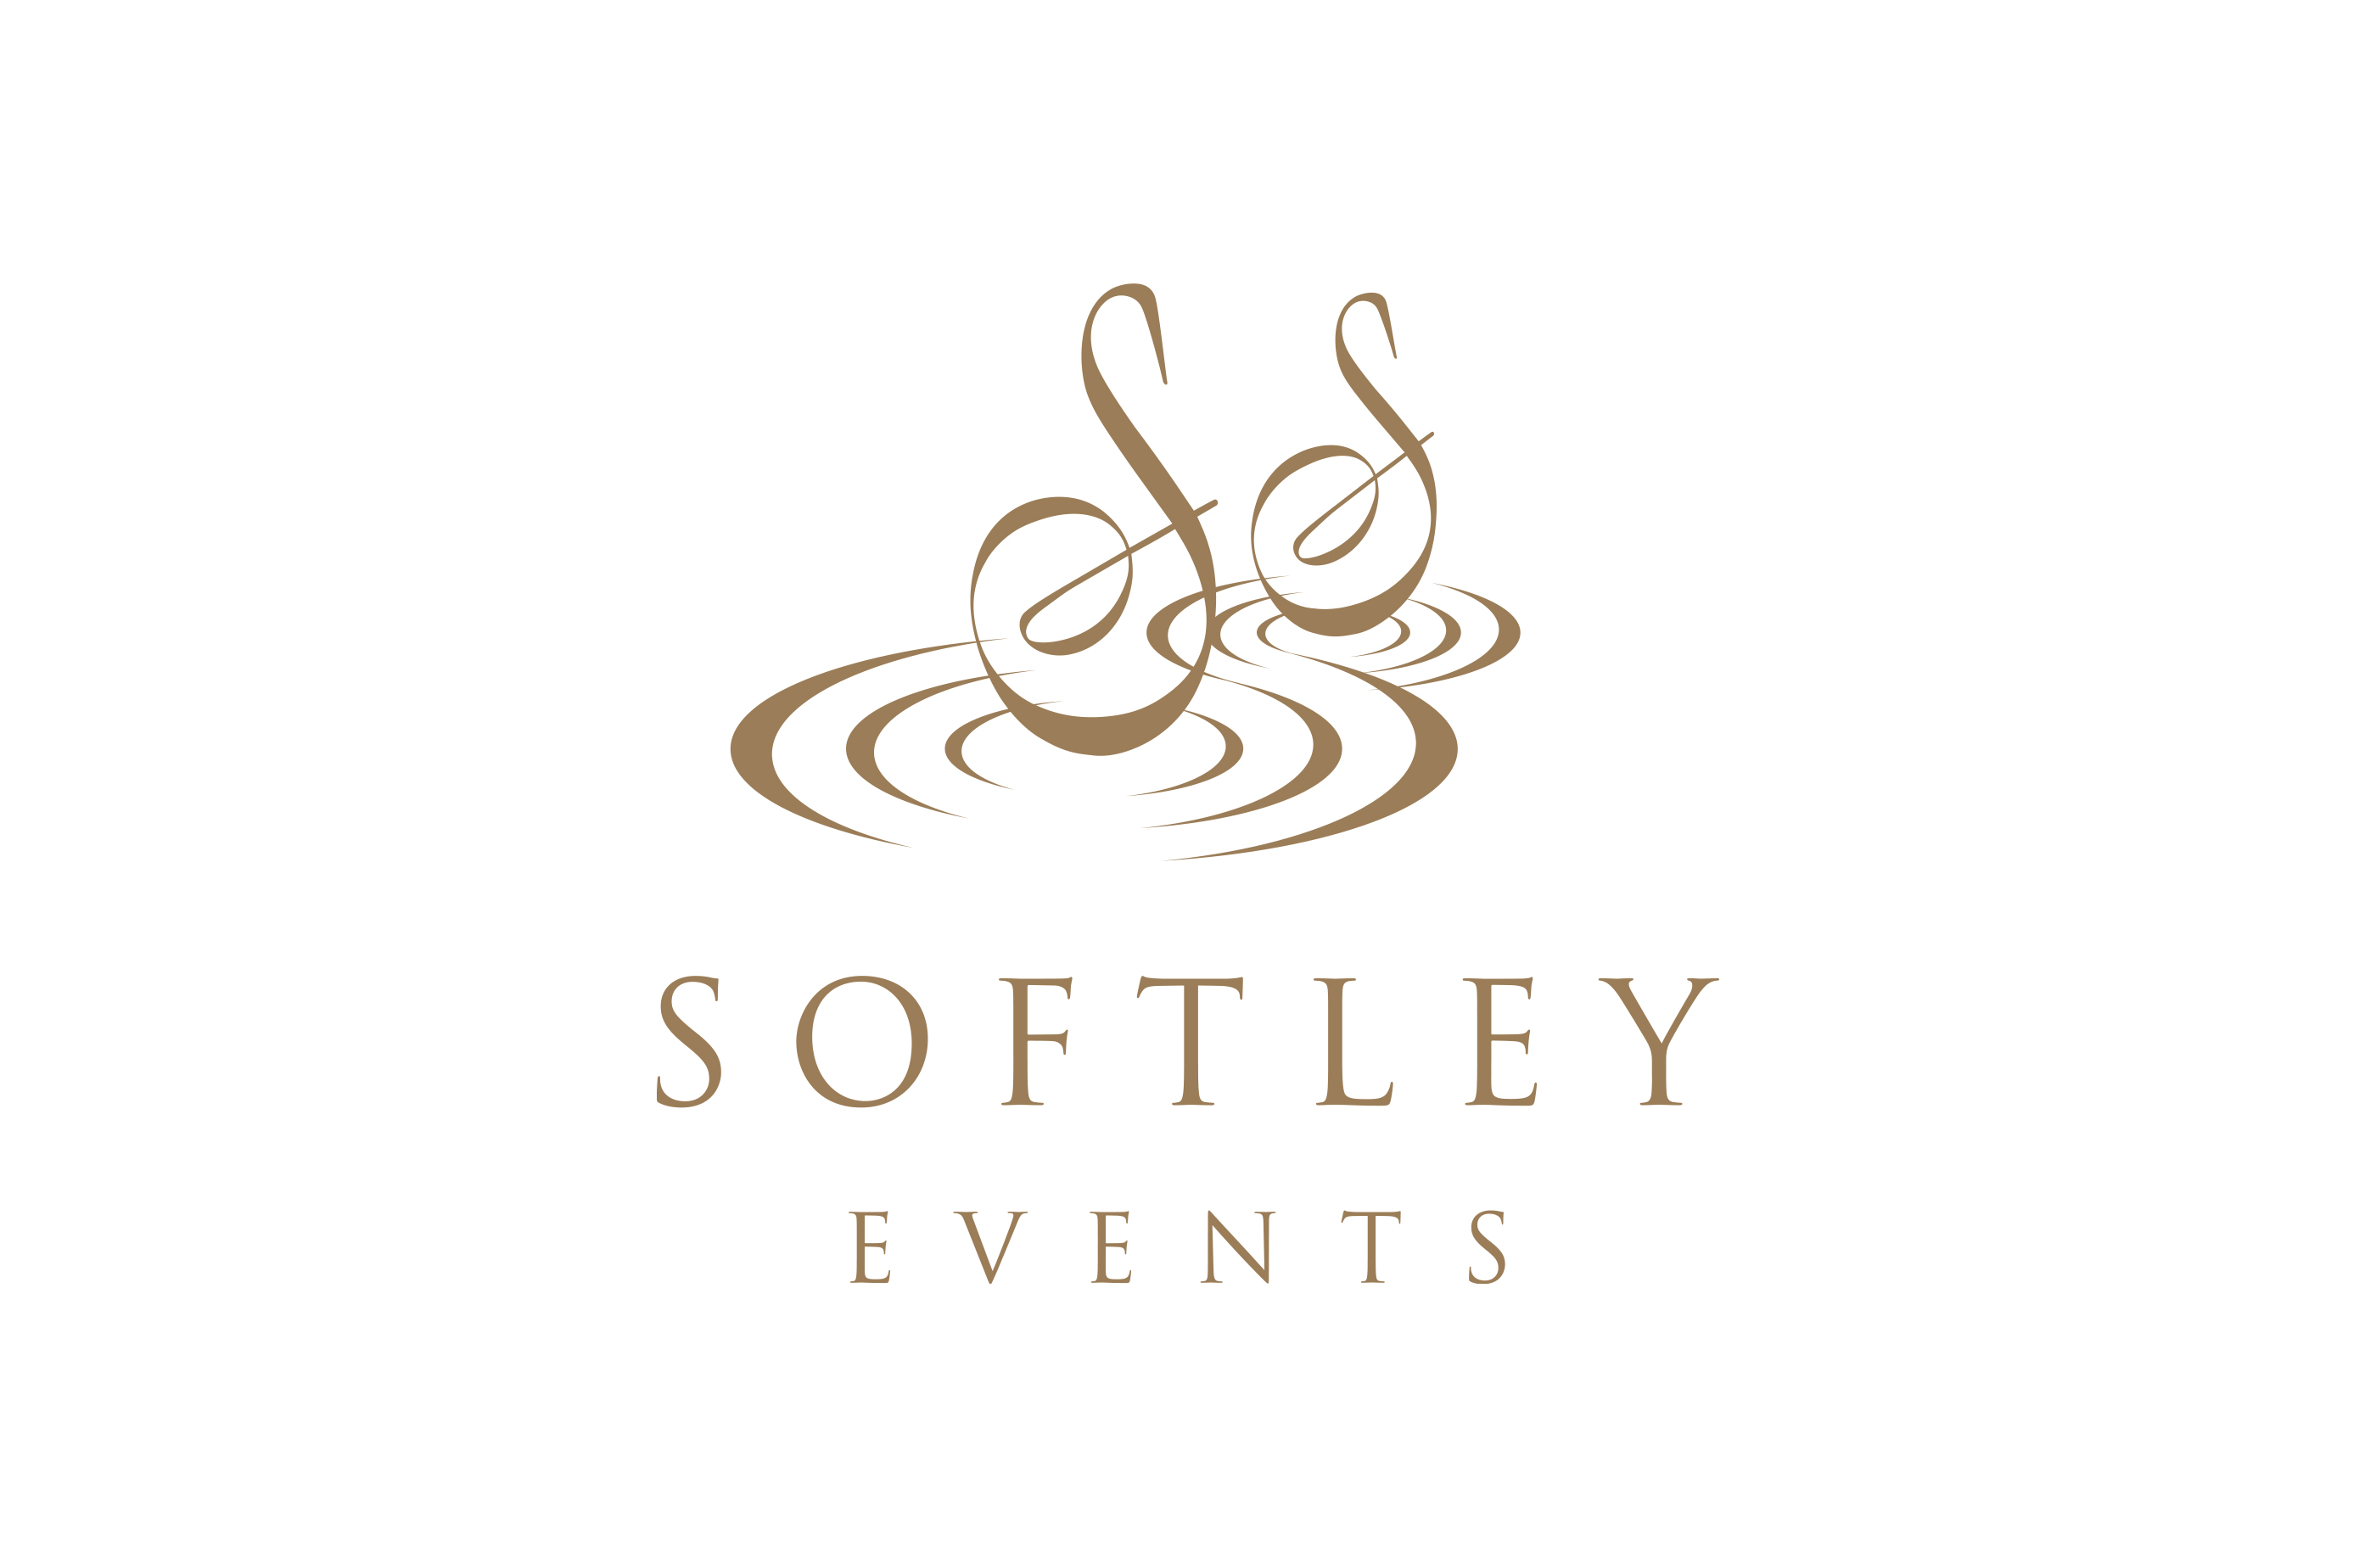 Softley Events, print and website design